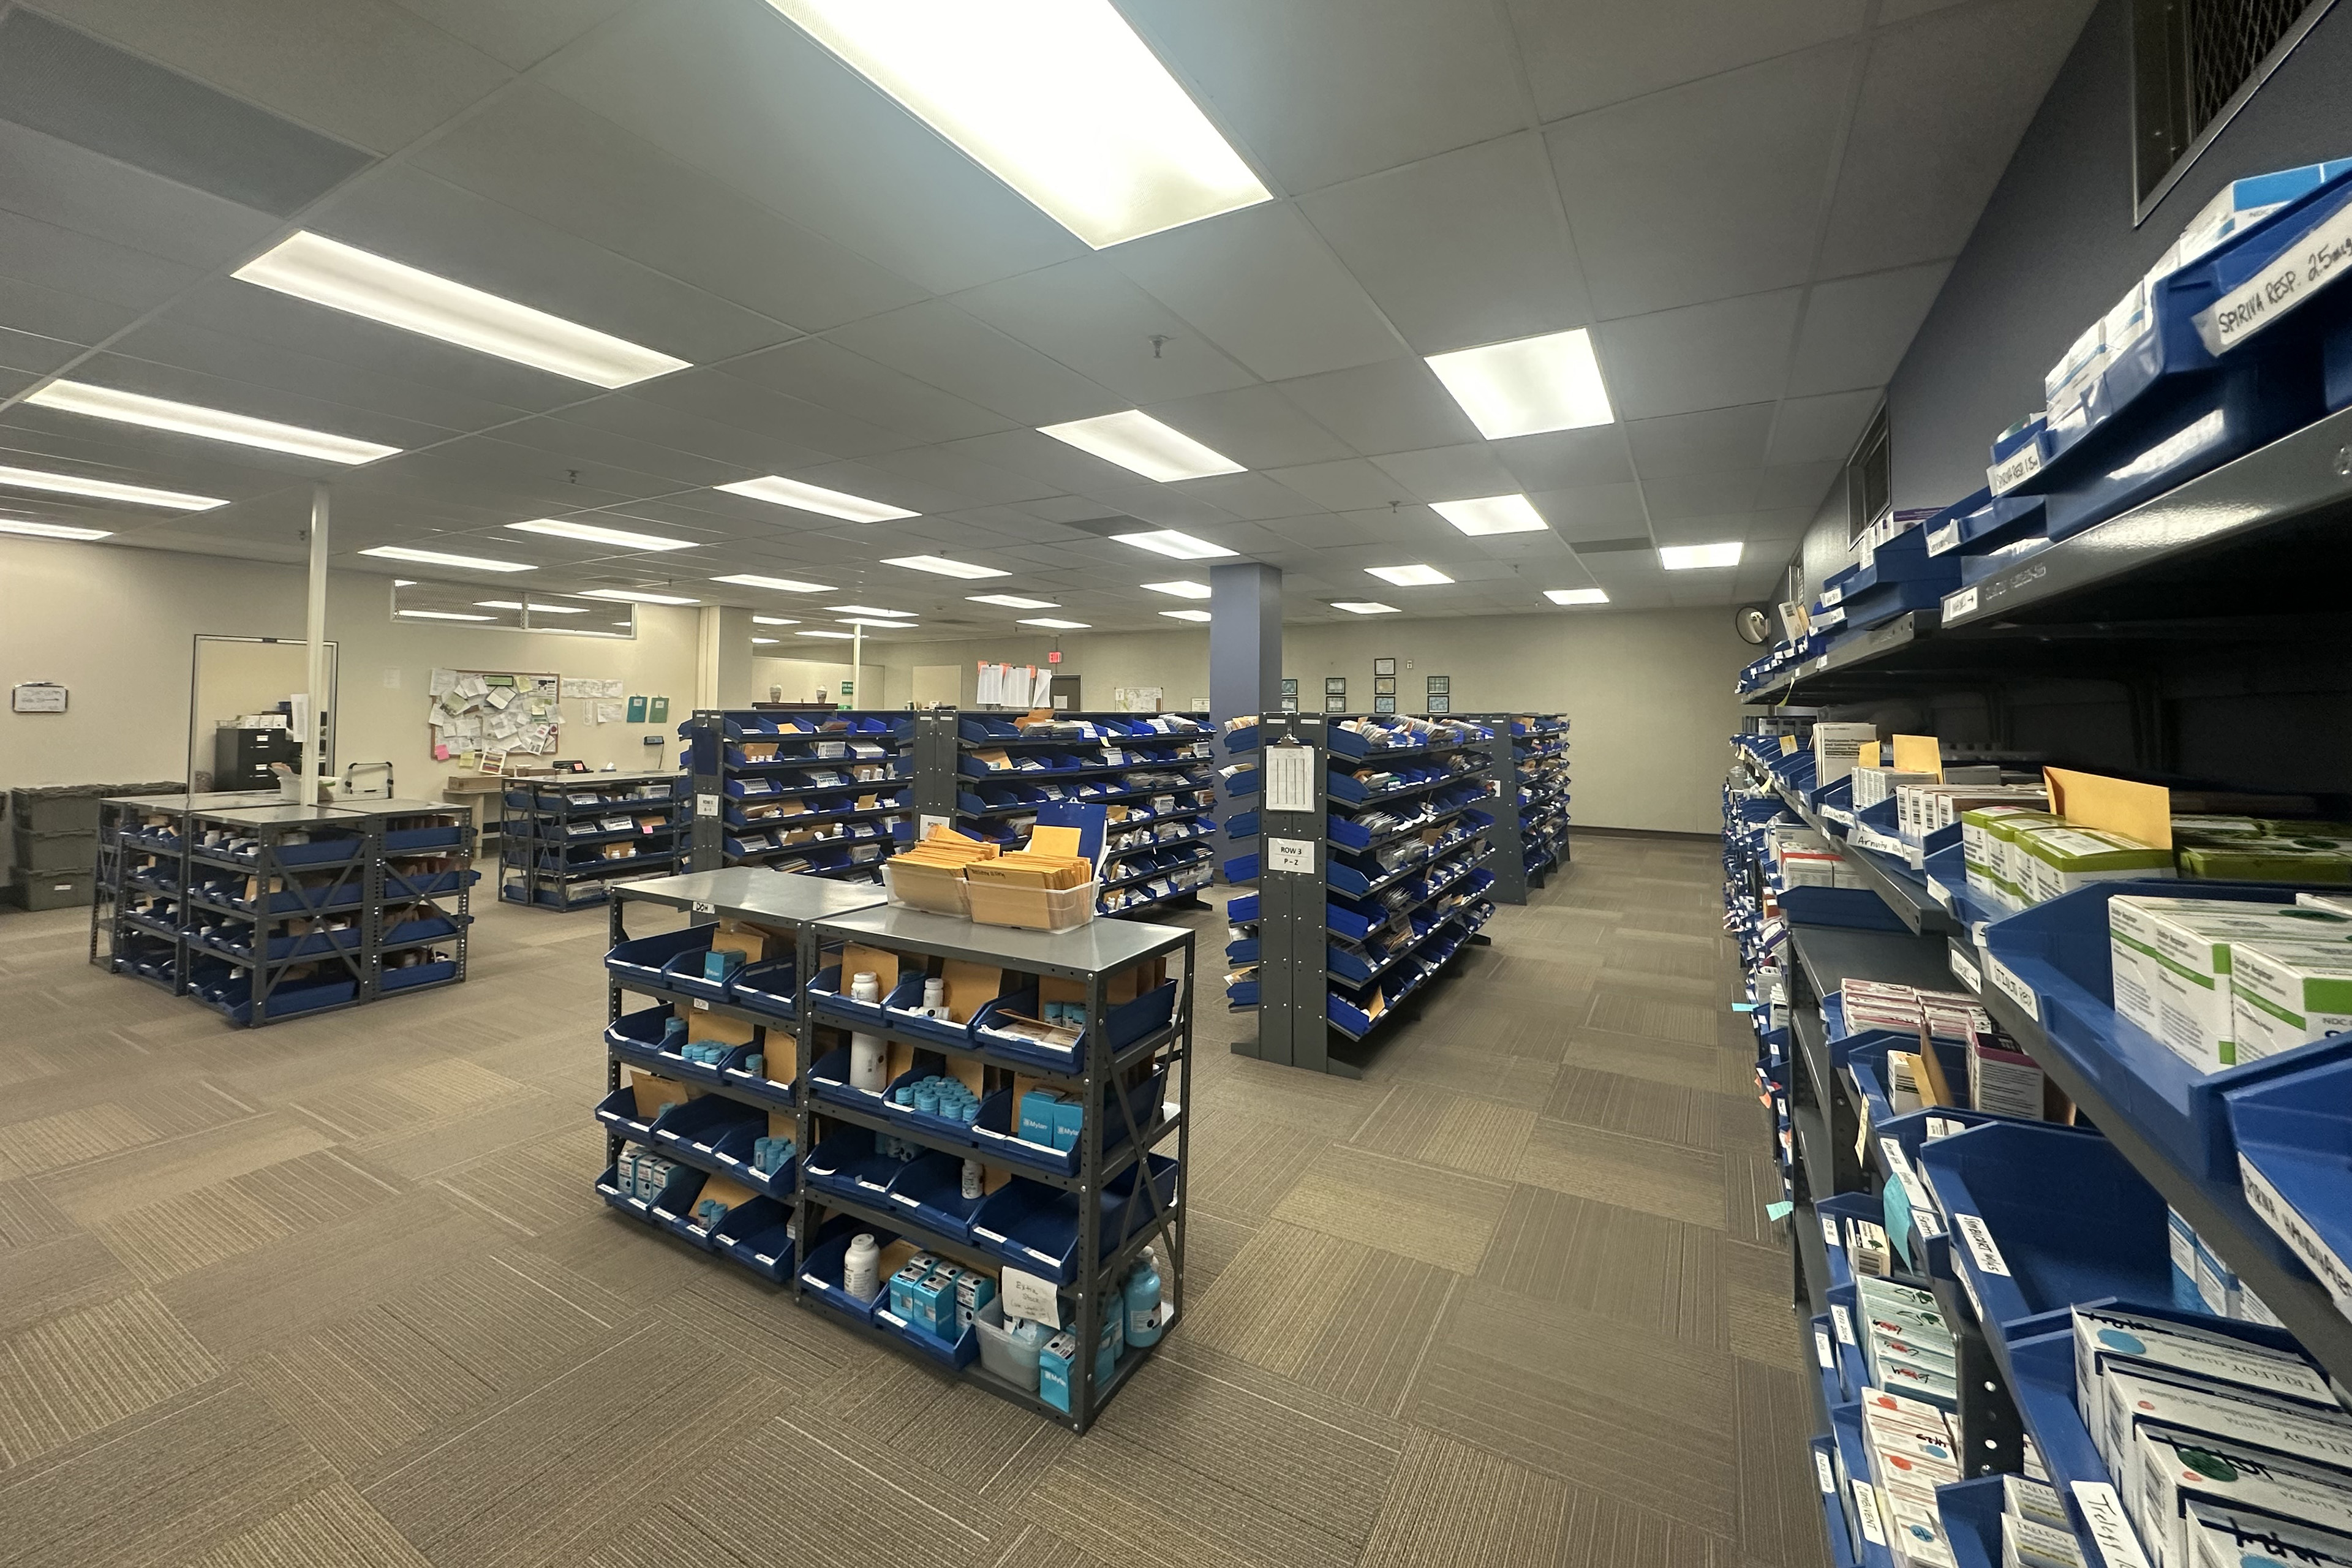 The Wyoming Medication Donation Program’s pharmacy is shown in this undated photo in Cheyenne, Wyoming. It is a large room containing rows of shelves that contain medication.